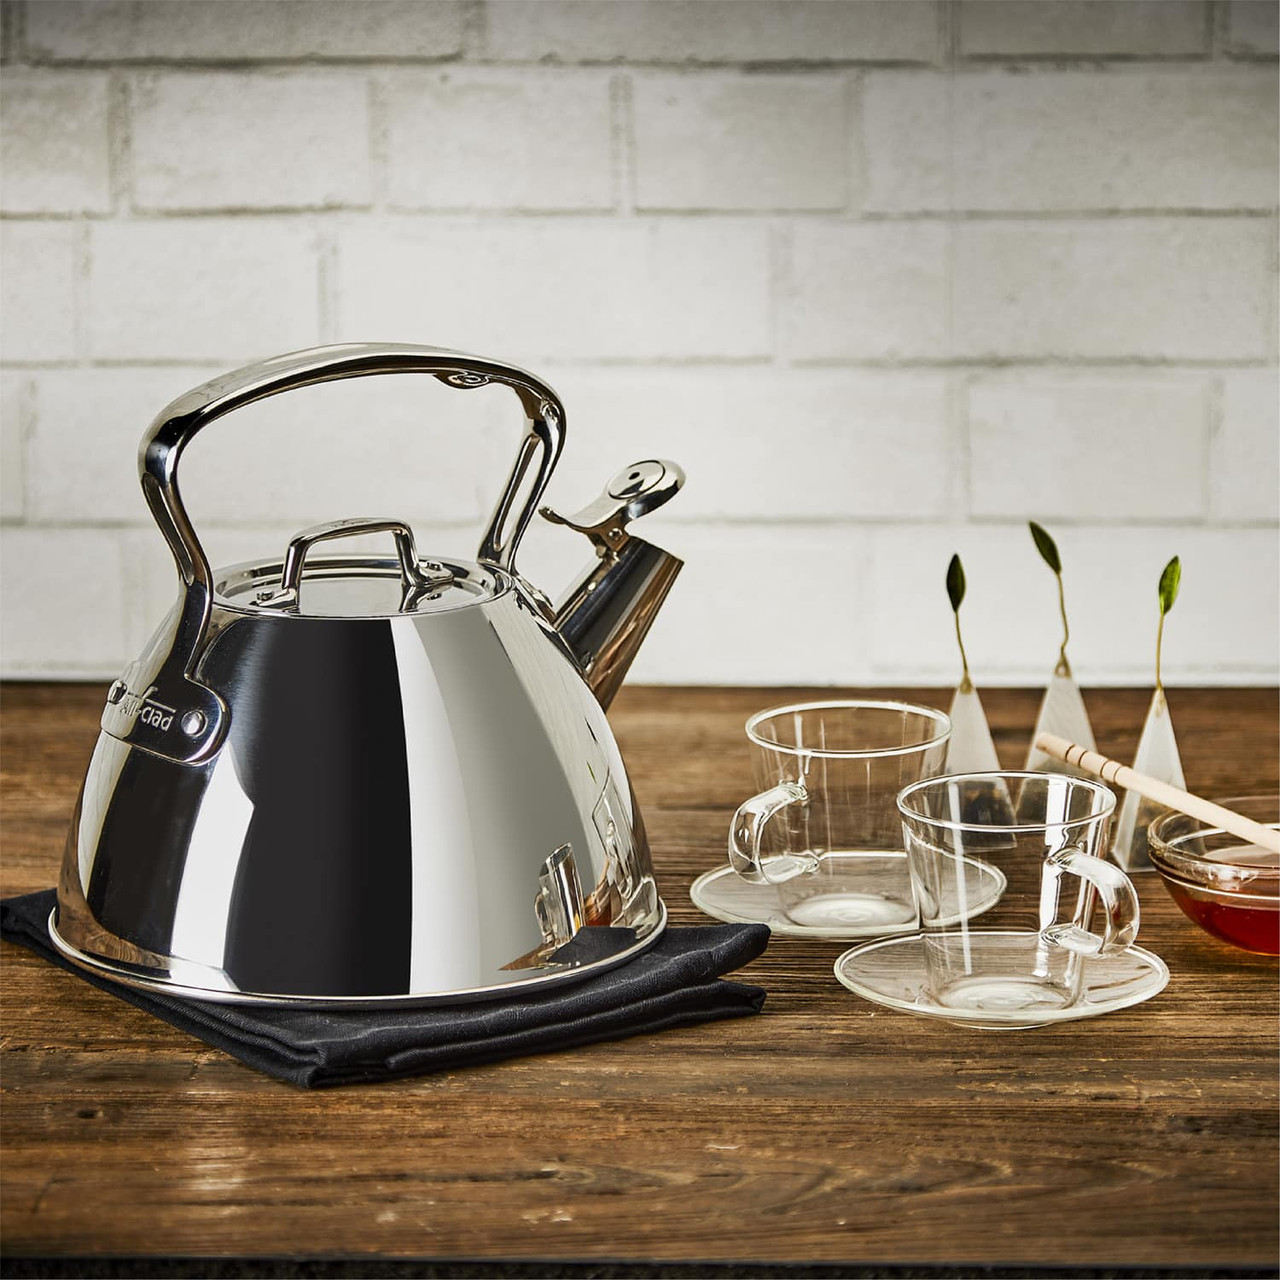 https://cdn11.bigcommerce.com/s-hccytny0od/images/stencil/1280x1280/products/4021/14807/all-clad-stainless-steel-tea-kettle-7__77961.1620122812.jpg?c=2?imbypass=on